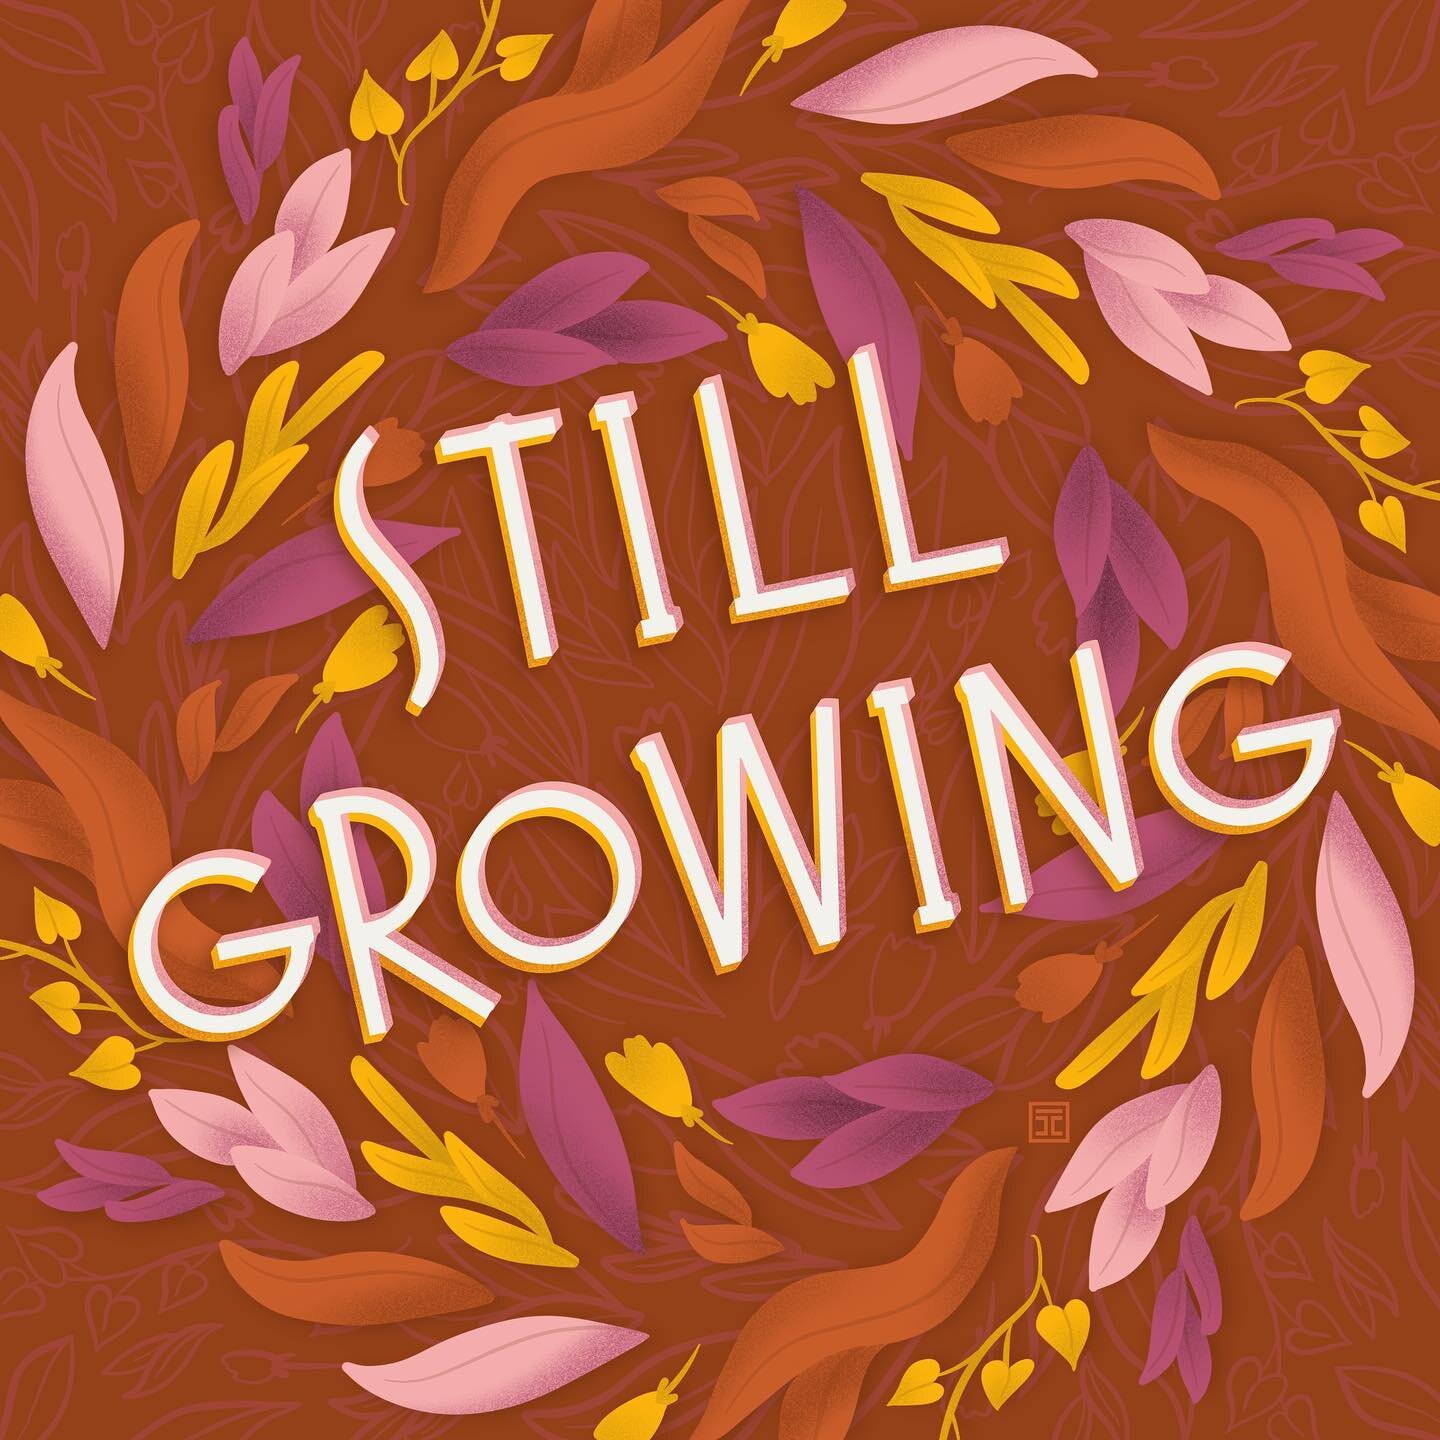 A moment of affirmation or permission or whatever you need for your Monday: We&rsquo;re all still growing. ✌🏼